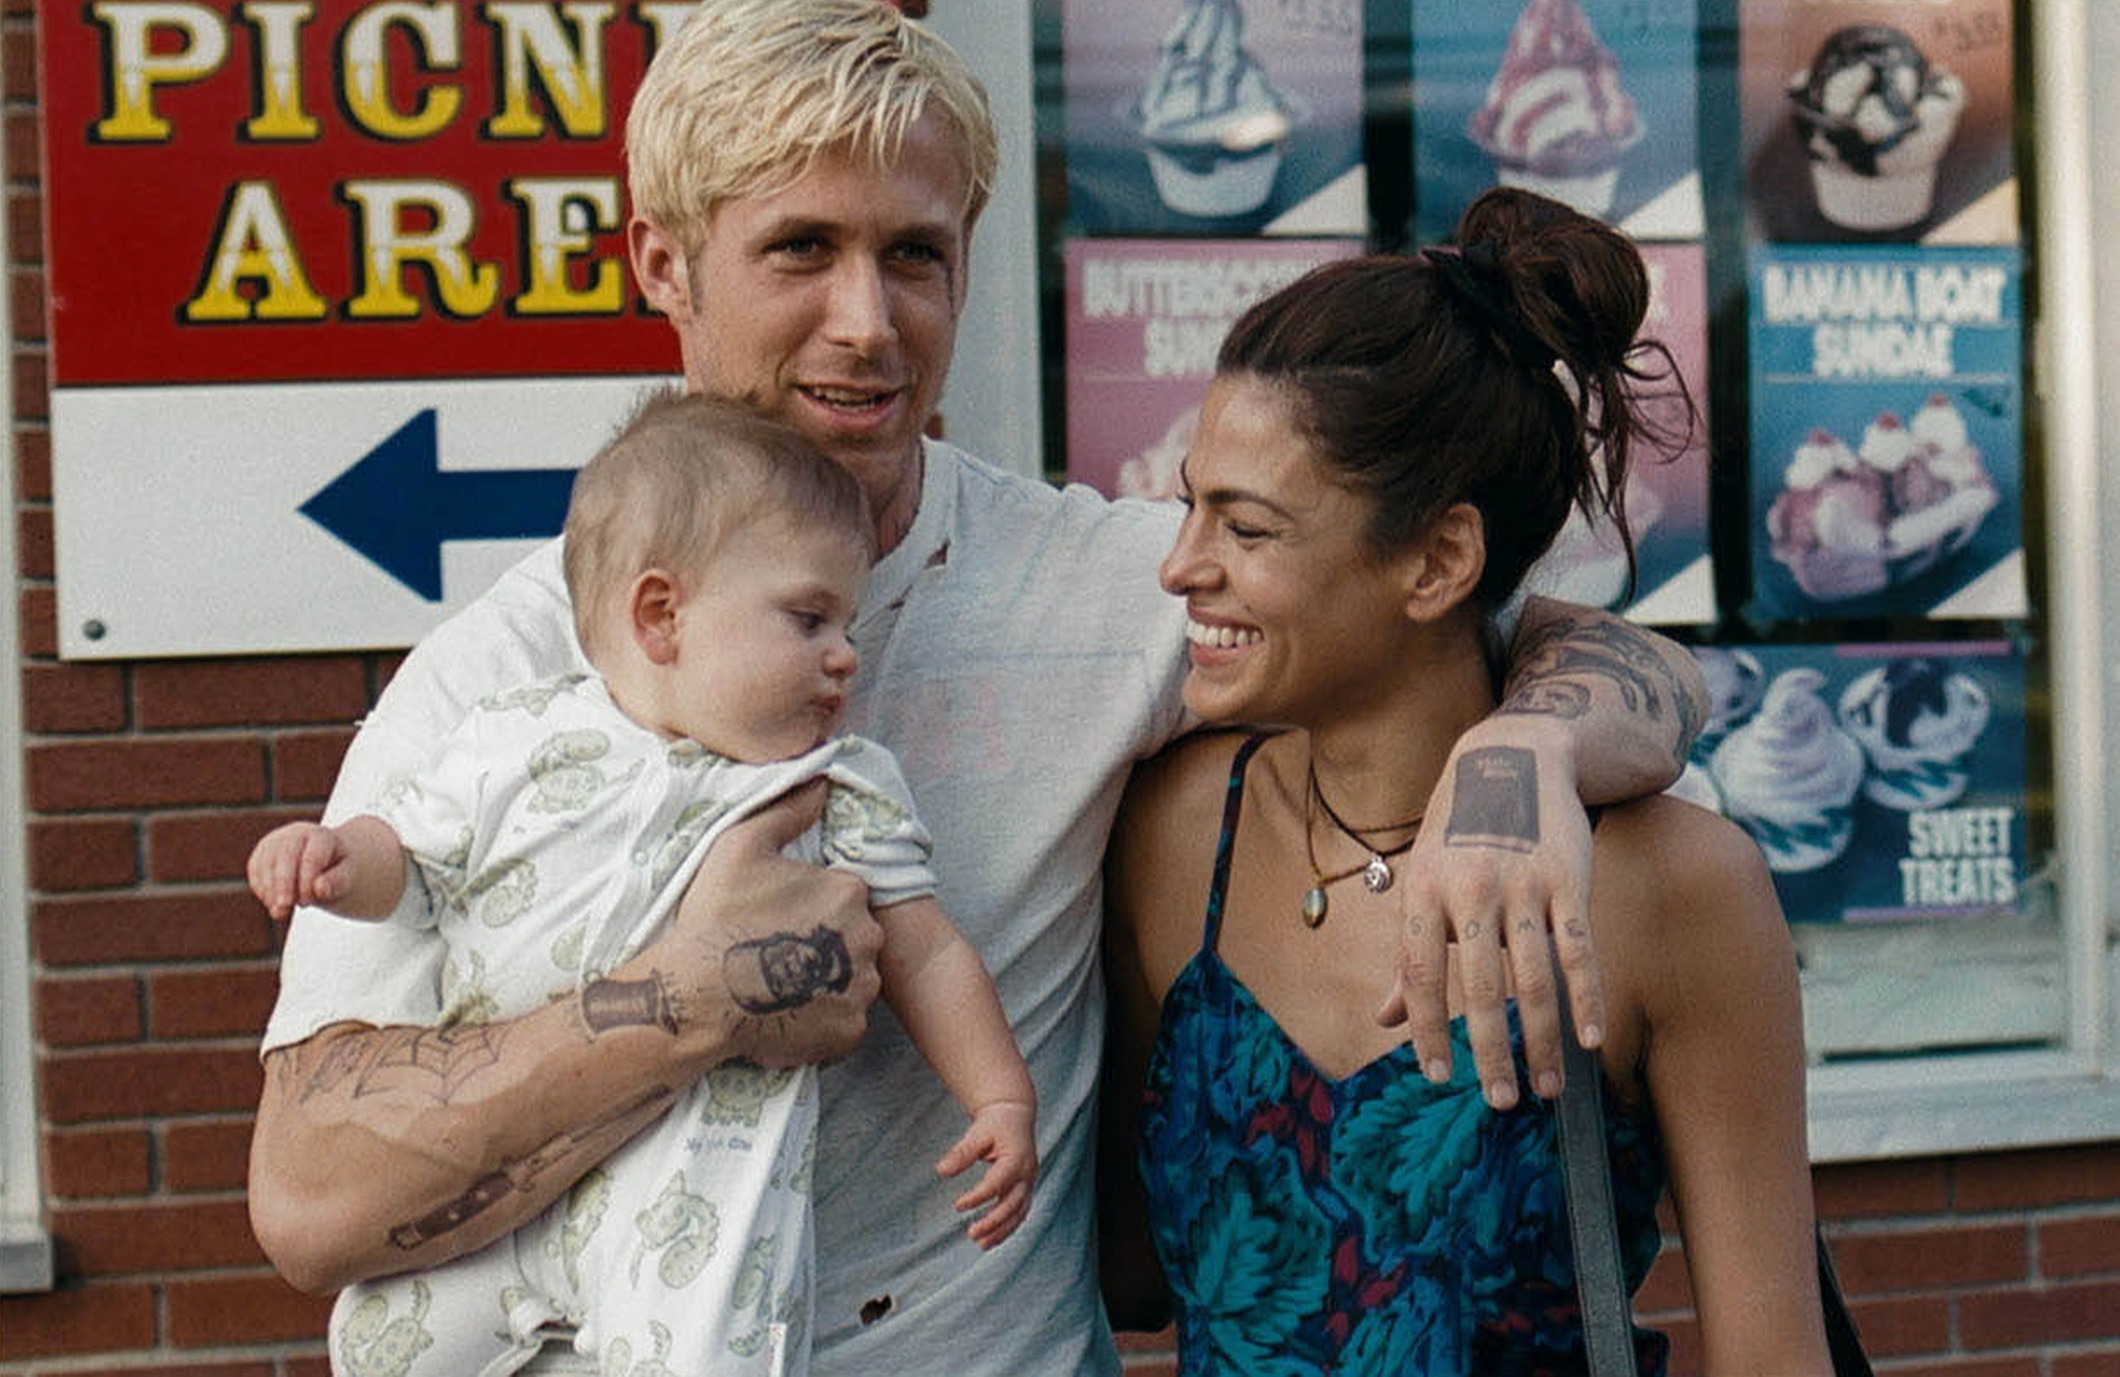 Ryan Gosling and Eva Mendes met on the set of the 2011 film The Place Beyond the Pines